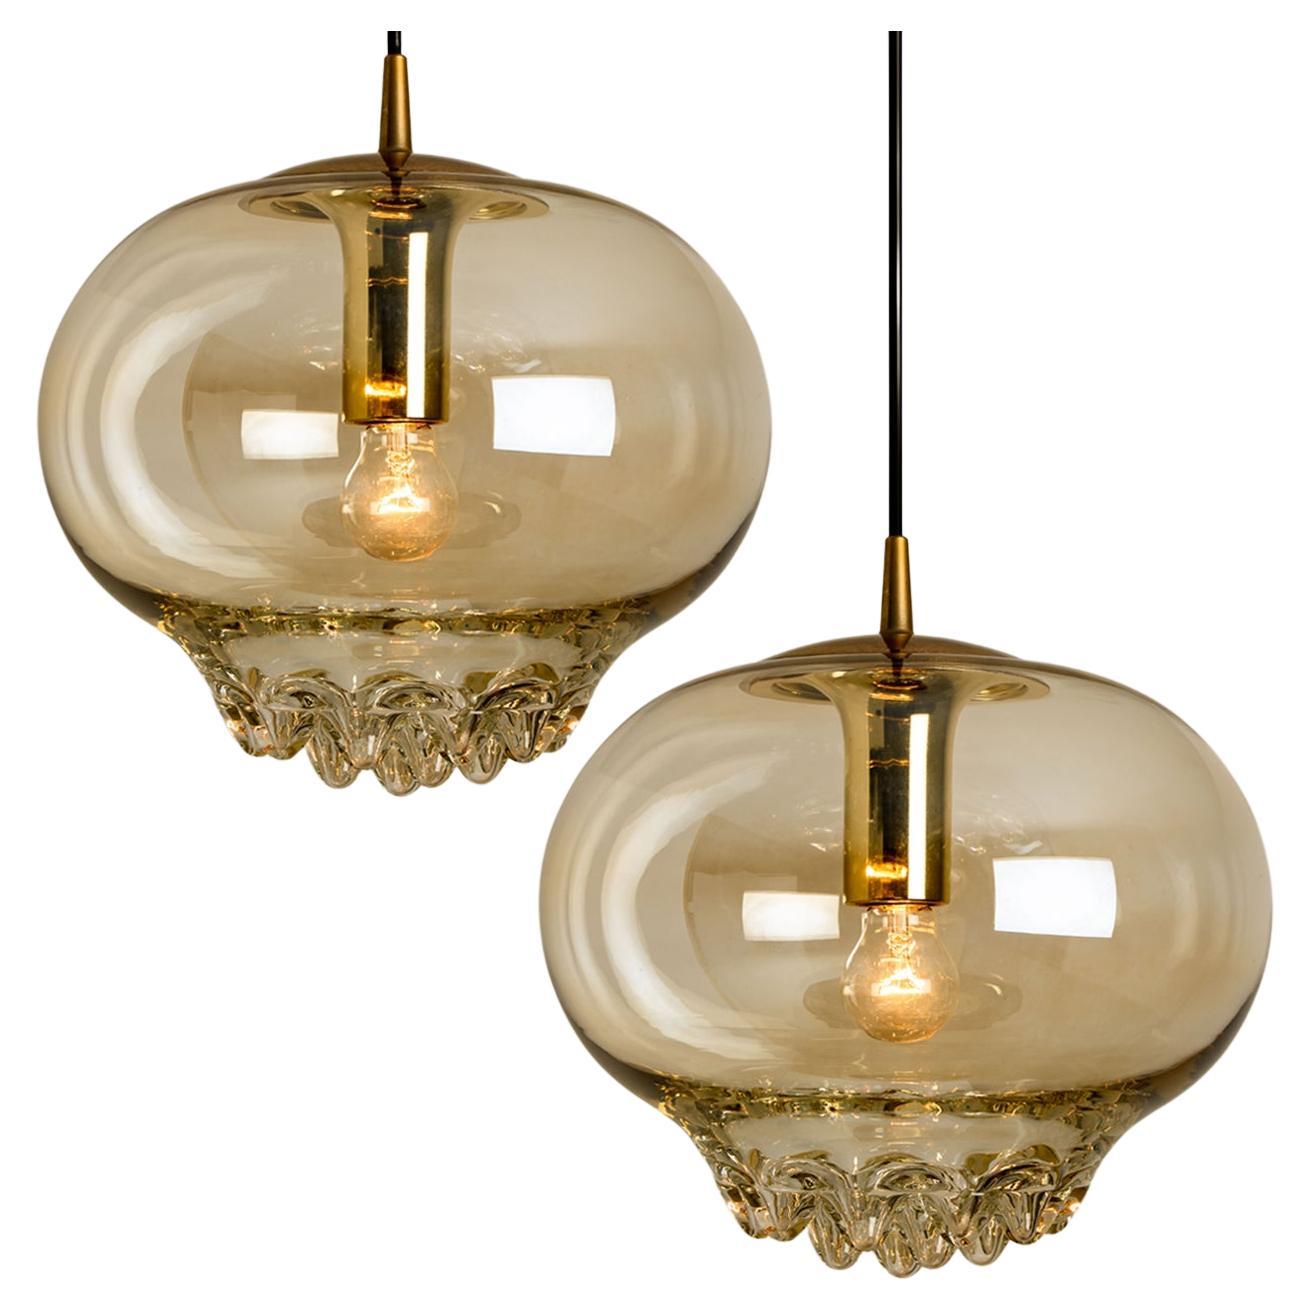 Pair of smoked golden/brown pendant lights, 1960s by Peill and Putzler. A unique shape and a wonderful light effect due to lovely glass elements. High quality pieces. Illuminates beautiful. True craftsmanship of the 20th century.

Cleaned and